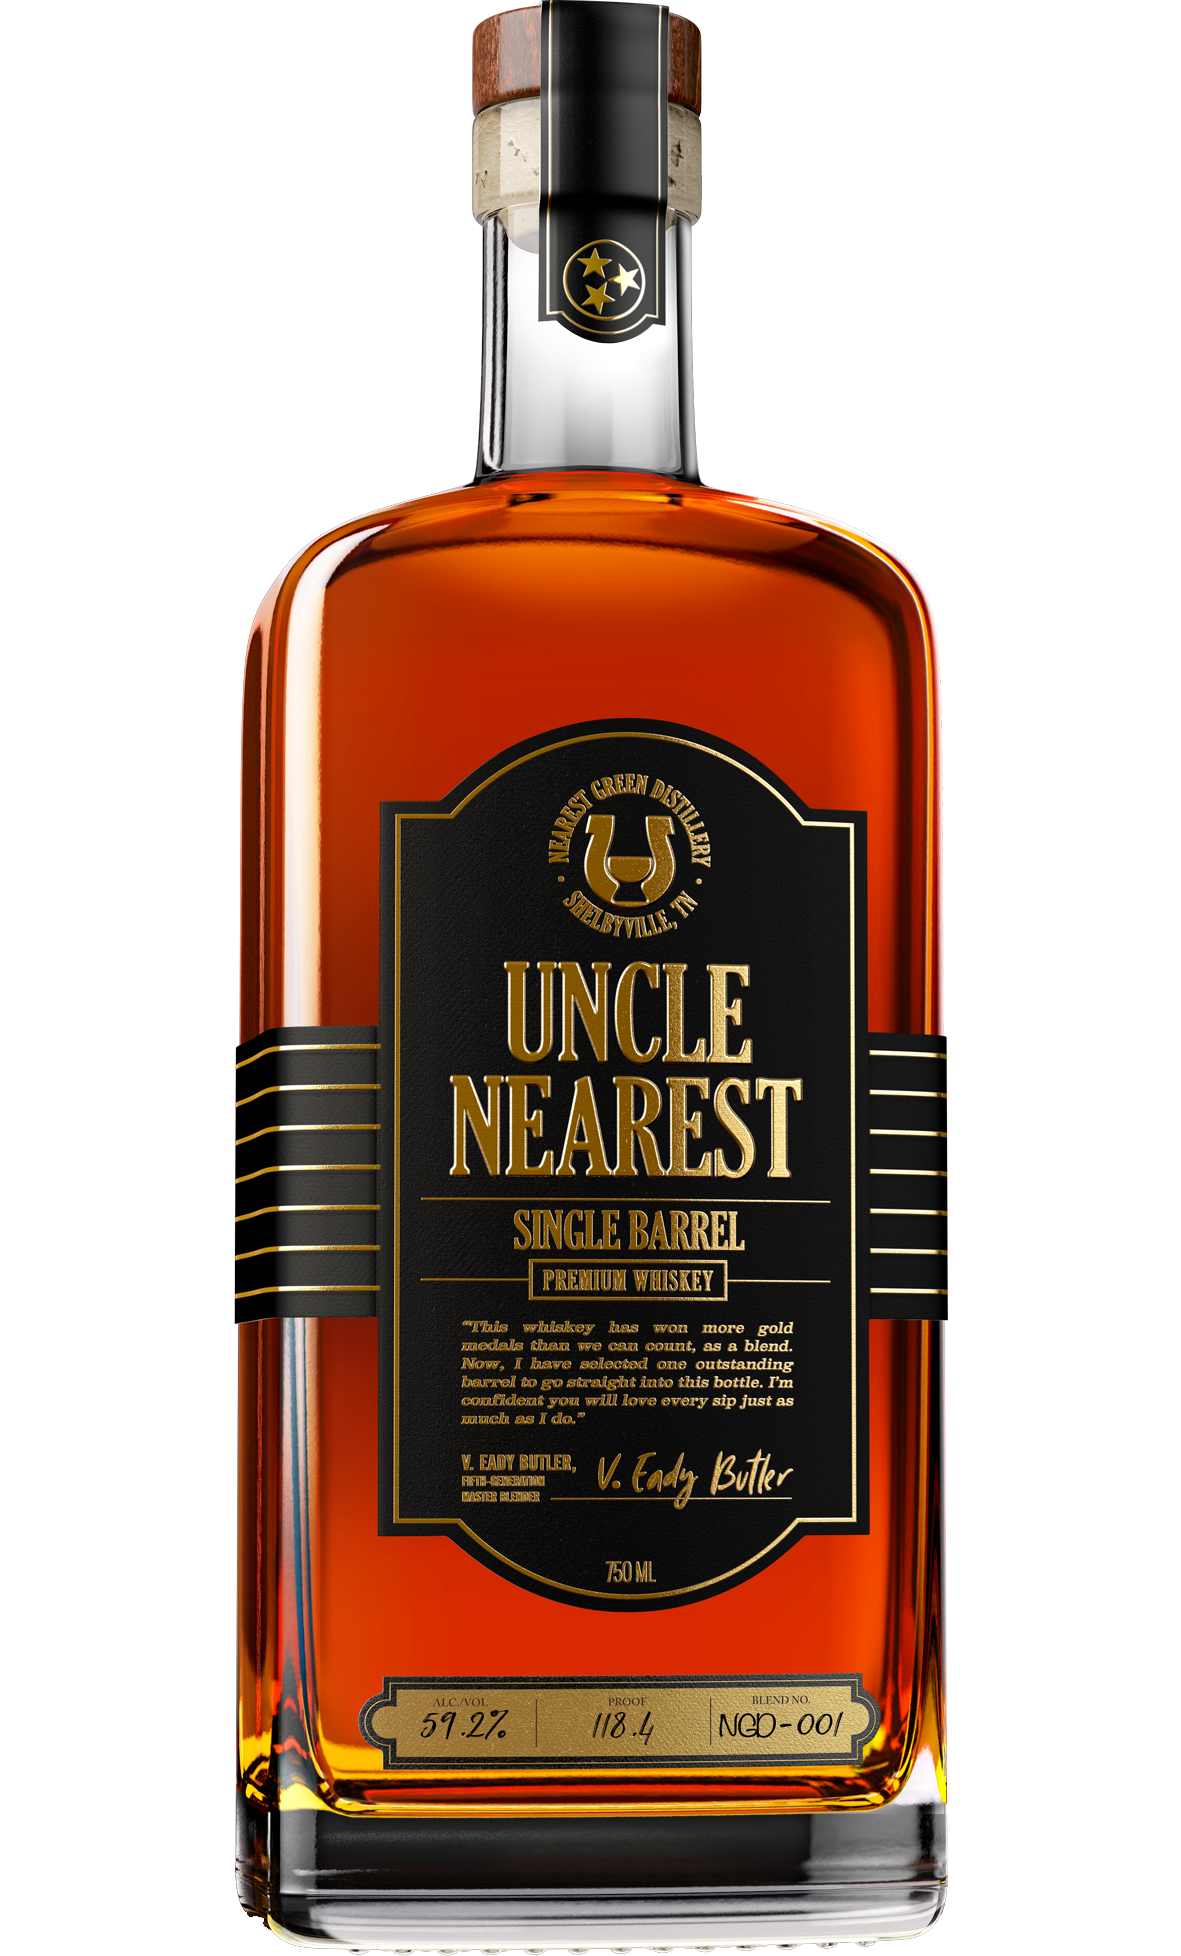 Uncle Nearest Single Barrel Whiskey 750ml, featuring a dark amber whiskey in a clear, elegantly labeled bottle, emphasizing its premium single barrel quality and rich American heritage.